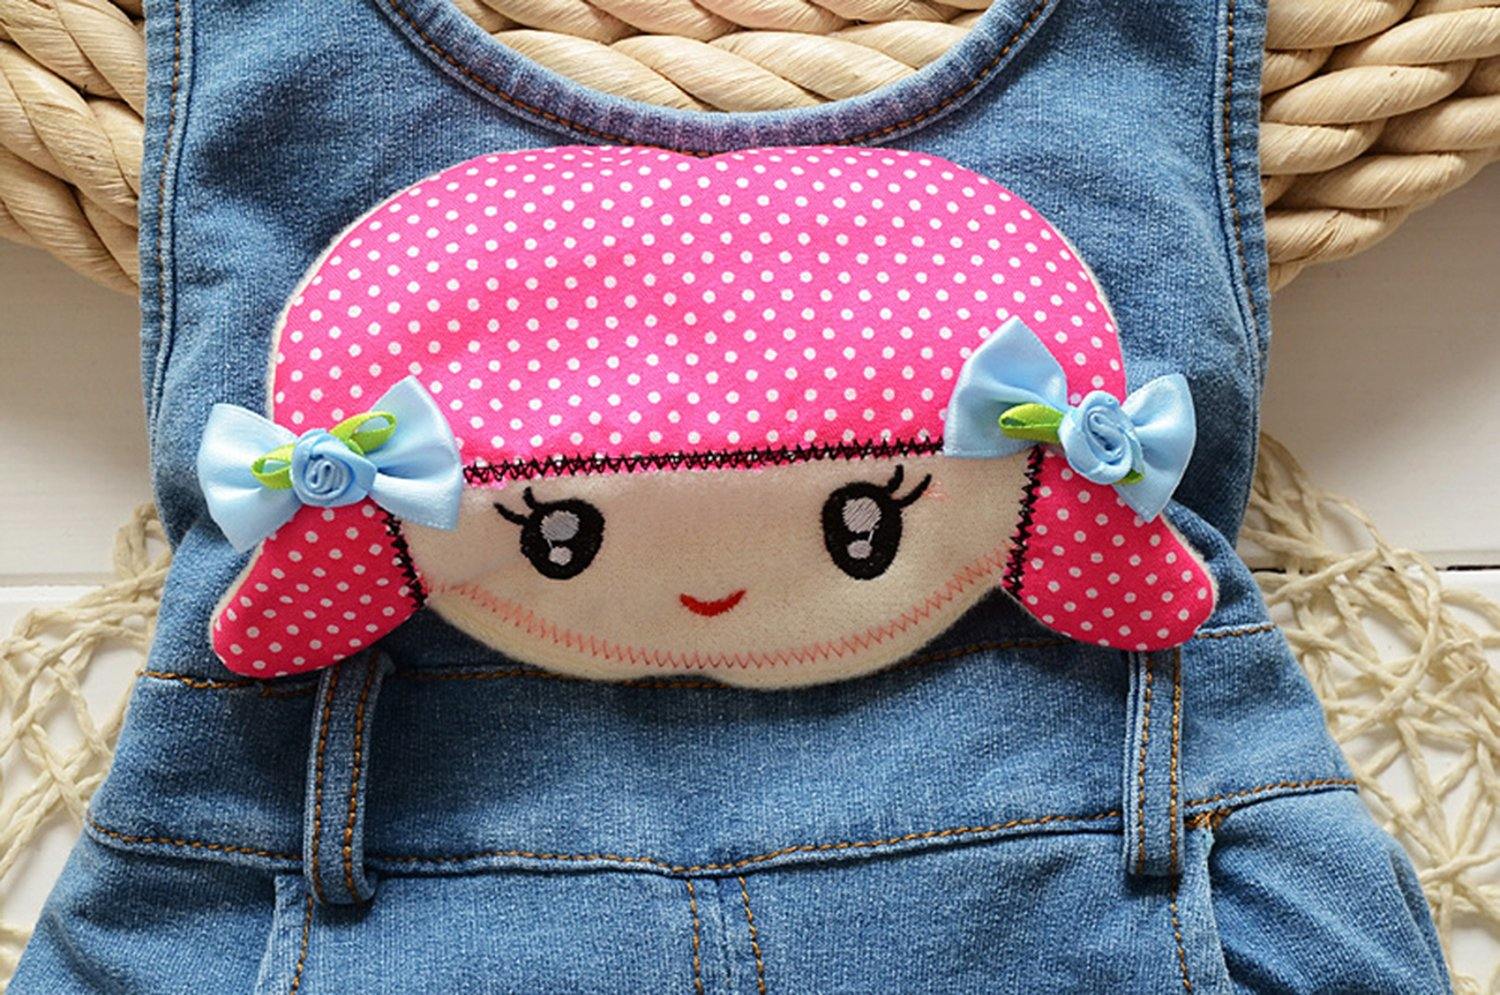 Kidscool Space Baby Toddler Girls Soft Knitted Cotton Denim Cute Girl Head Overalls - Kidscool Space